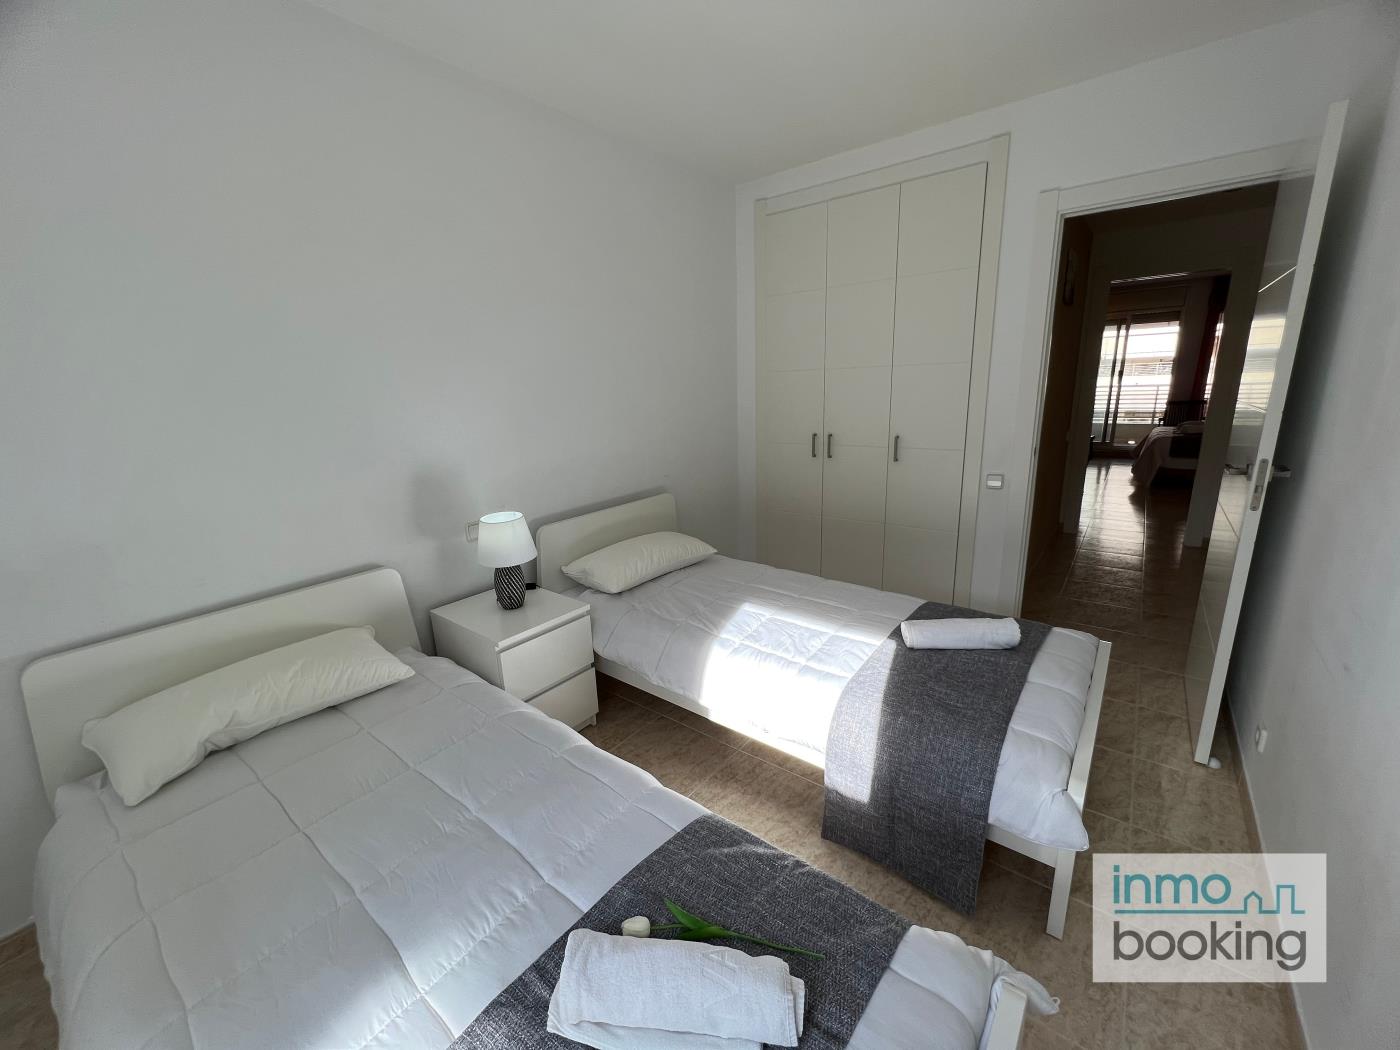 Inmobooking Villa Elvira, with swimming pool and free parking in salou